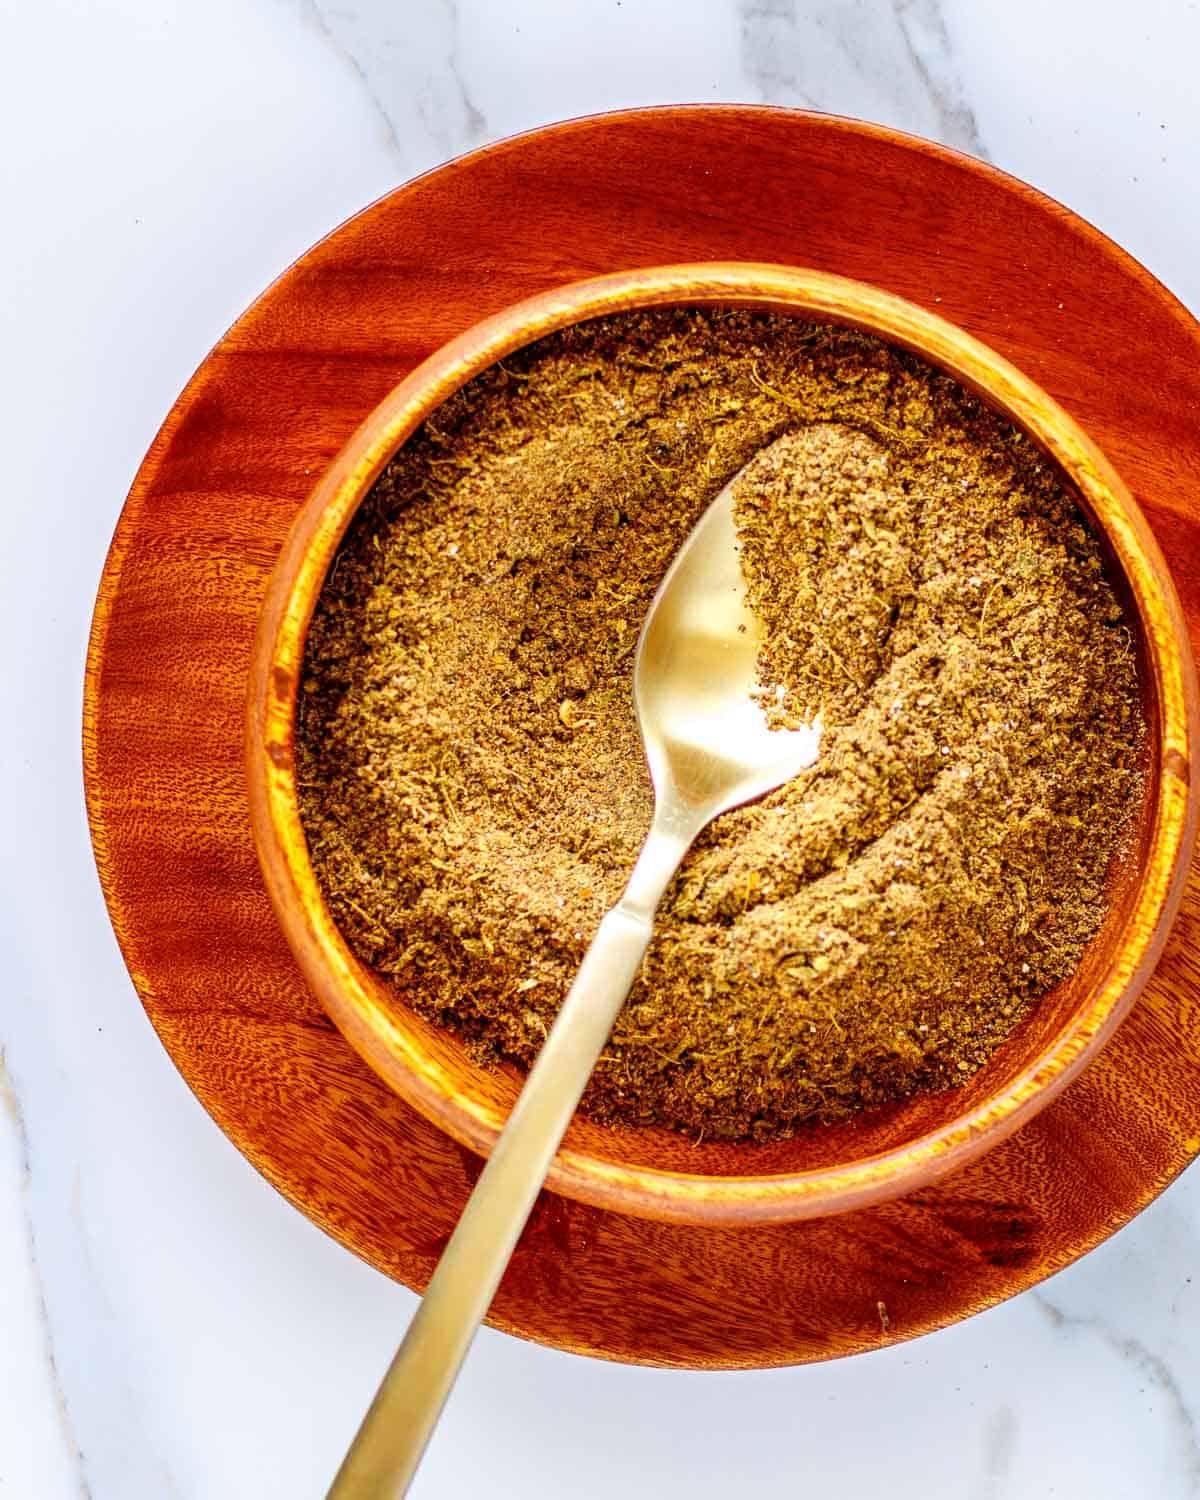 Powdered spices in a wooden bowl with a gold spoon.